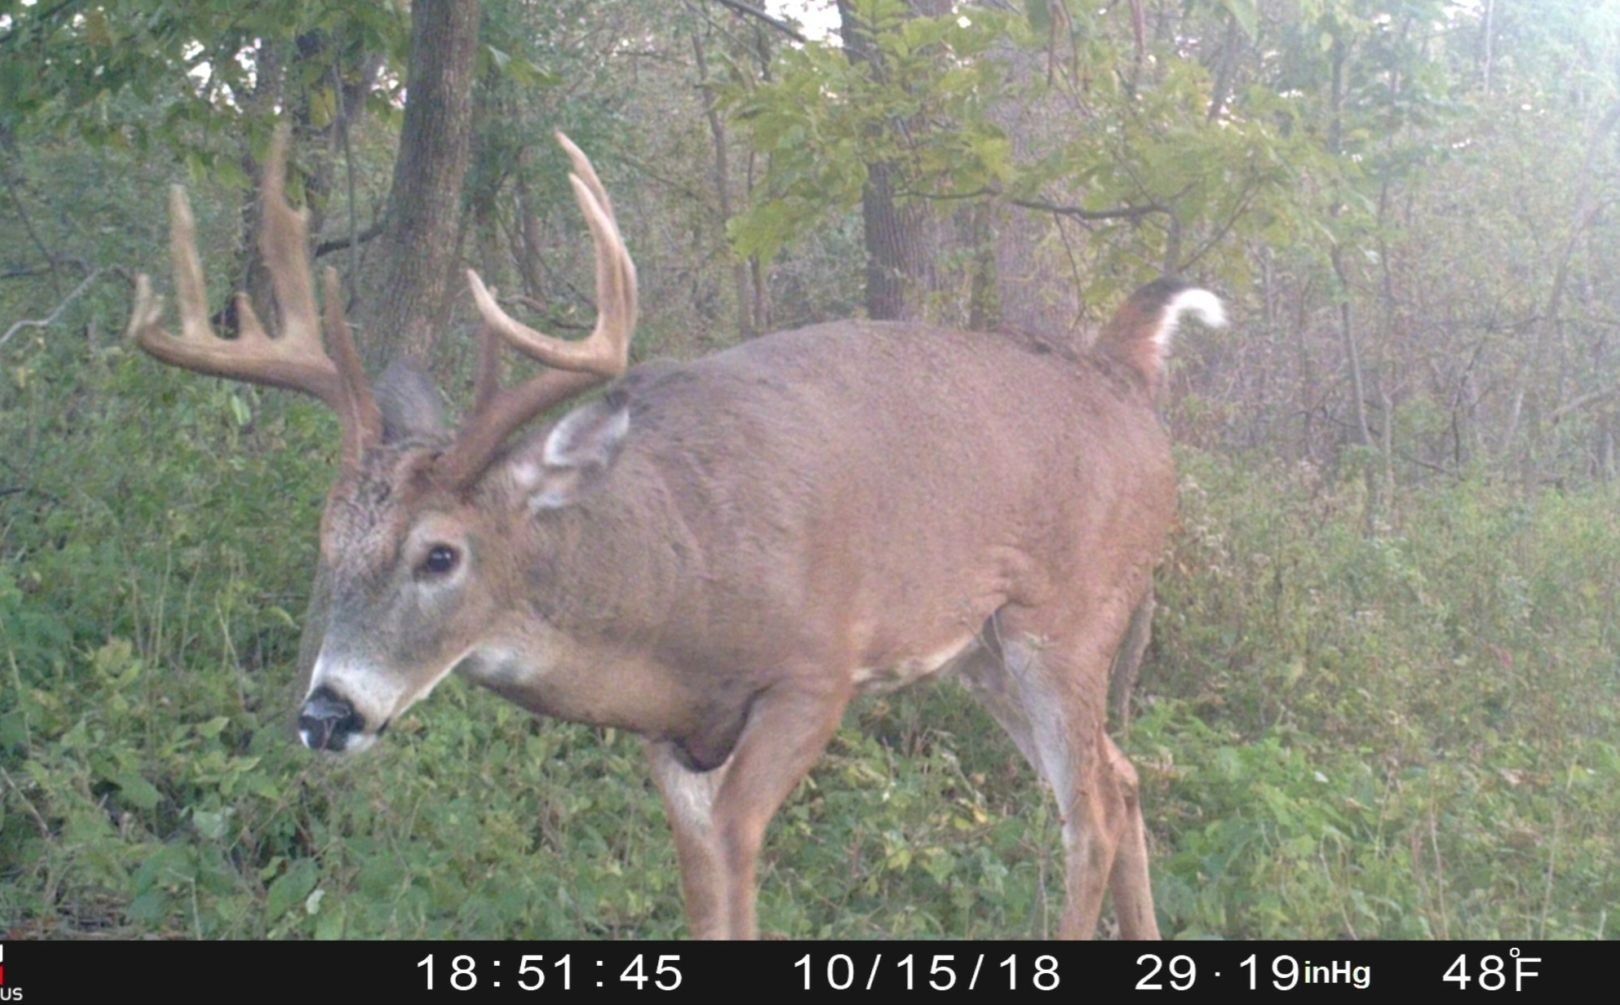 When Will The Whitetail Rut Begin | Whitetail Habitat Solutions  Nys 2020 Deer Rut